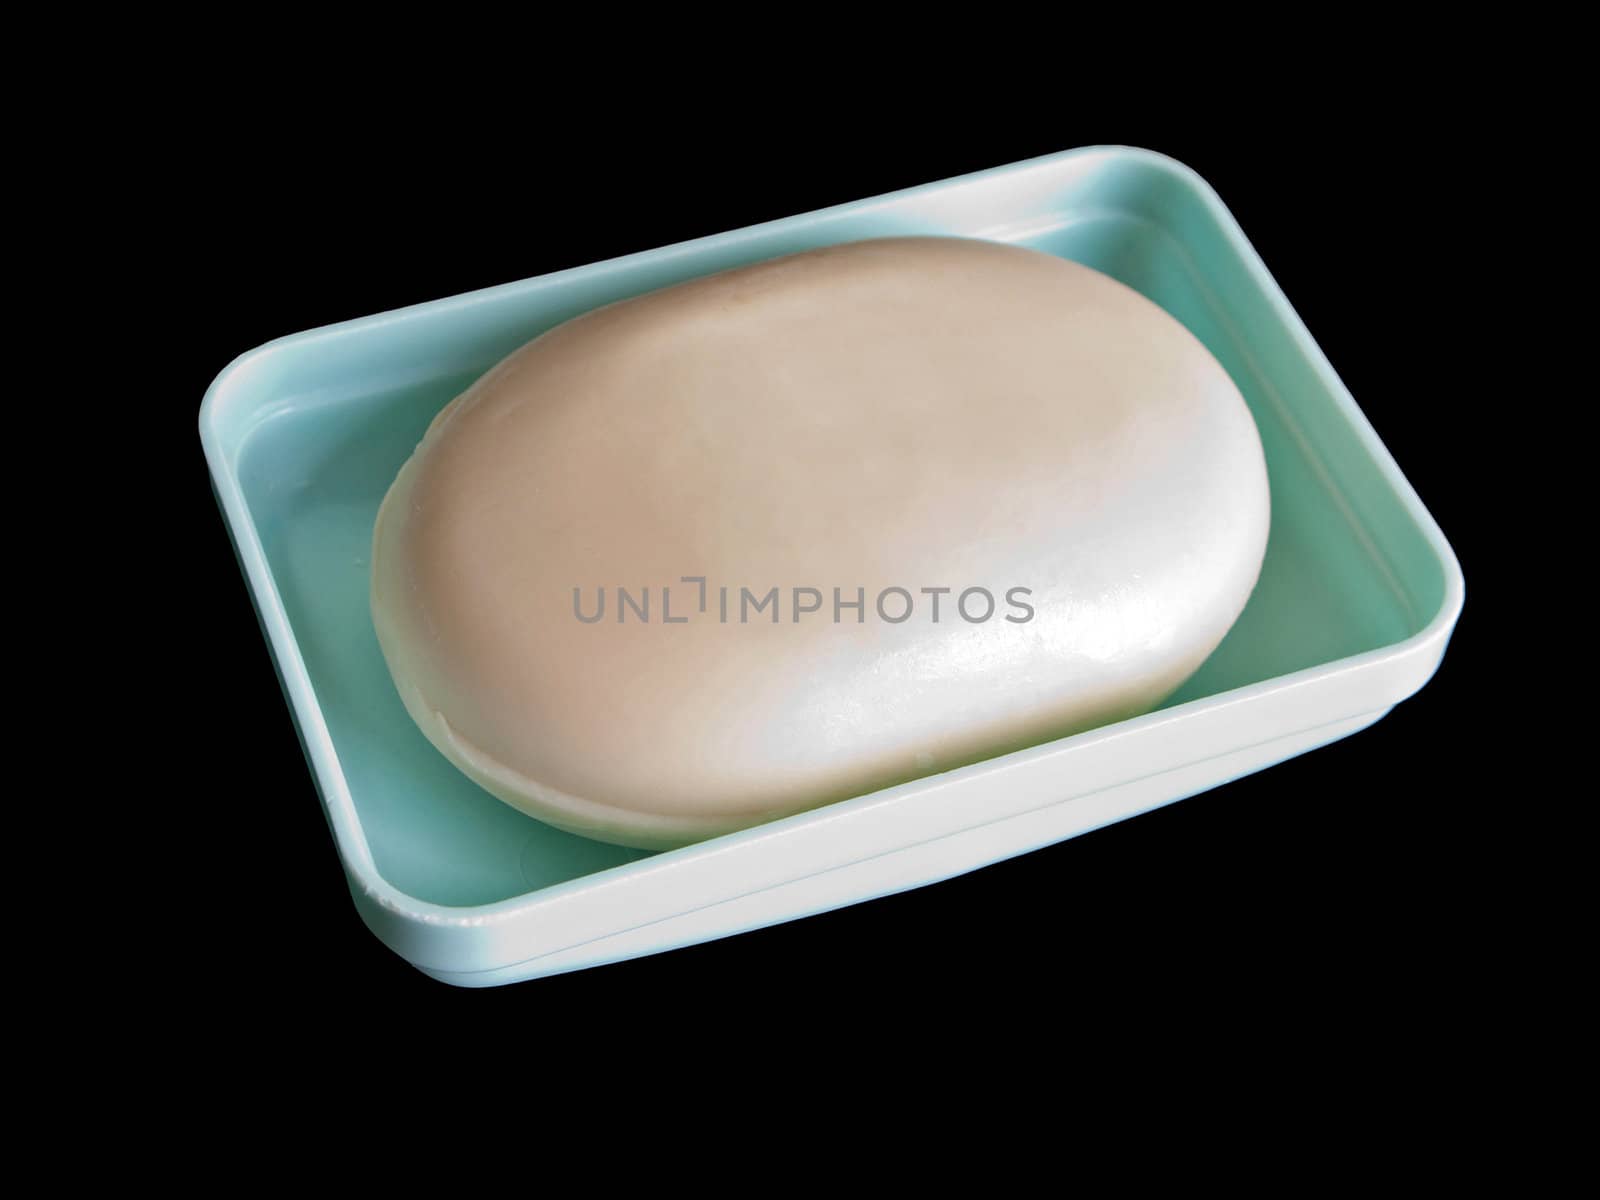 Hygiene care and beauty soap bar isolated on black